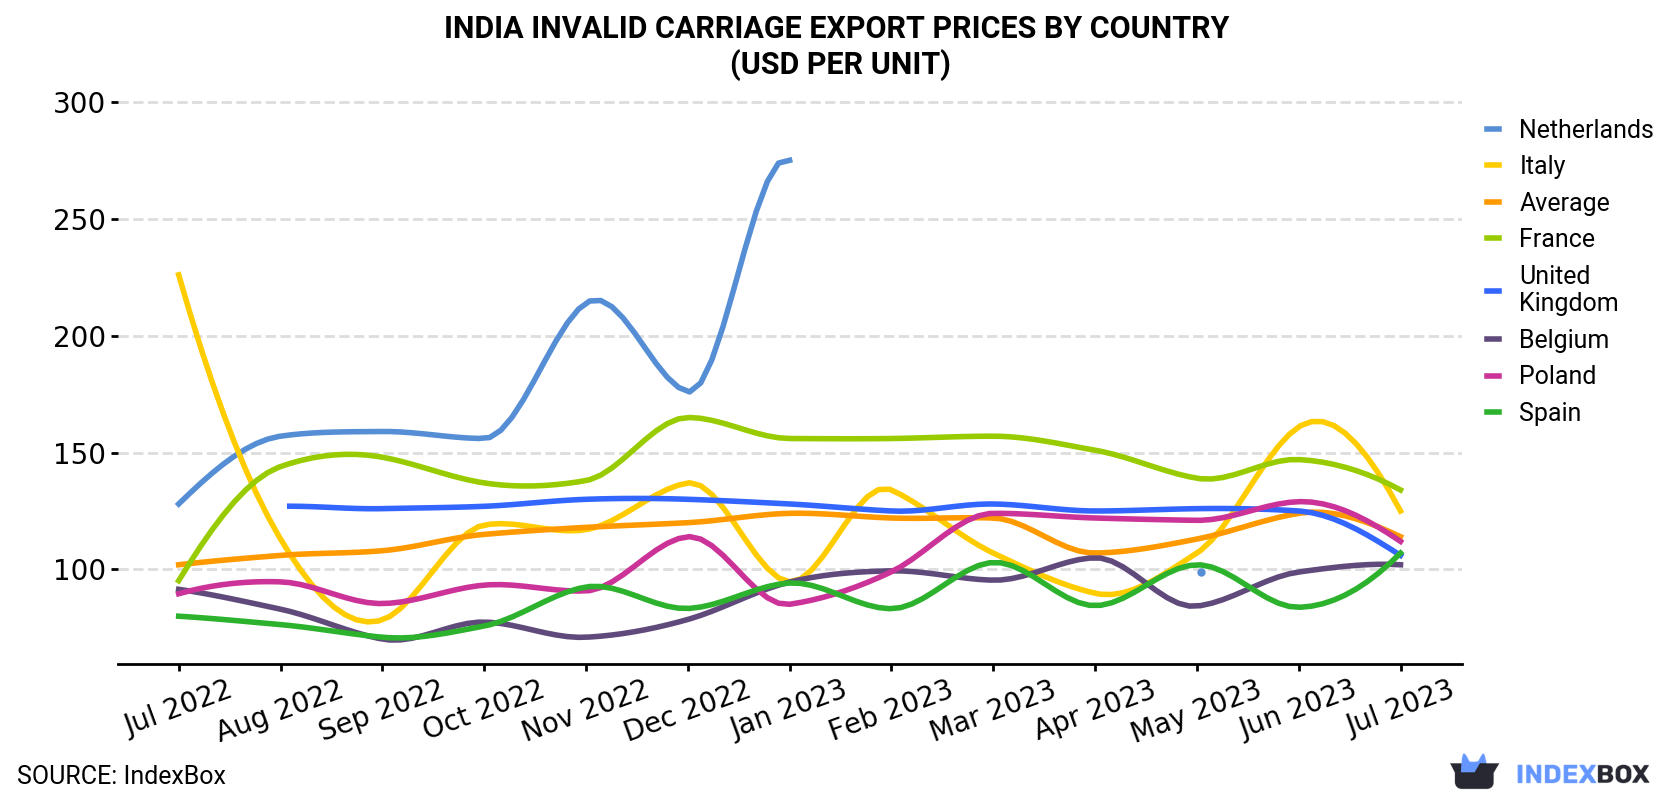 India Invalid Carriage Export Prices By Country (USD Per Unit)